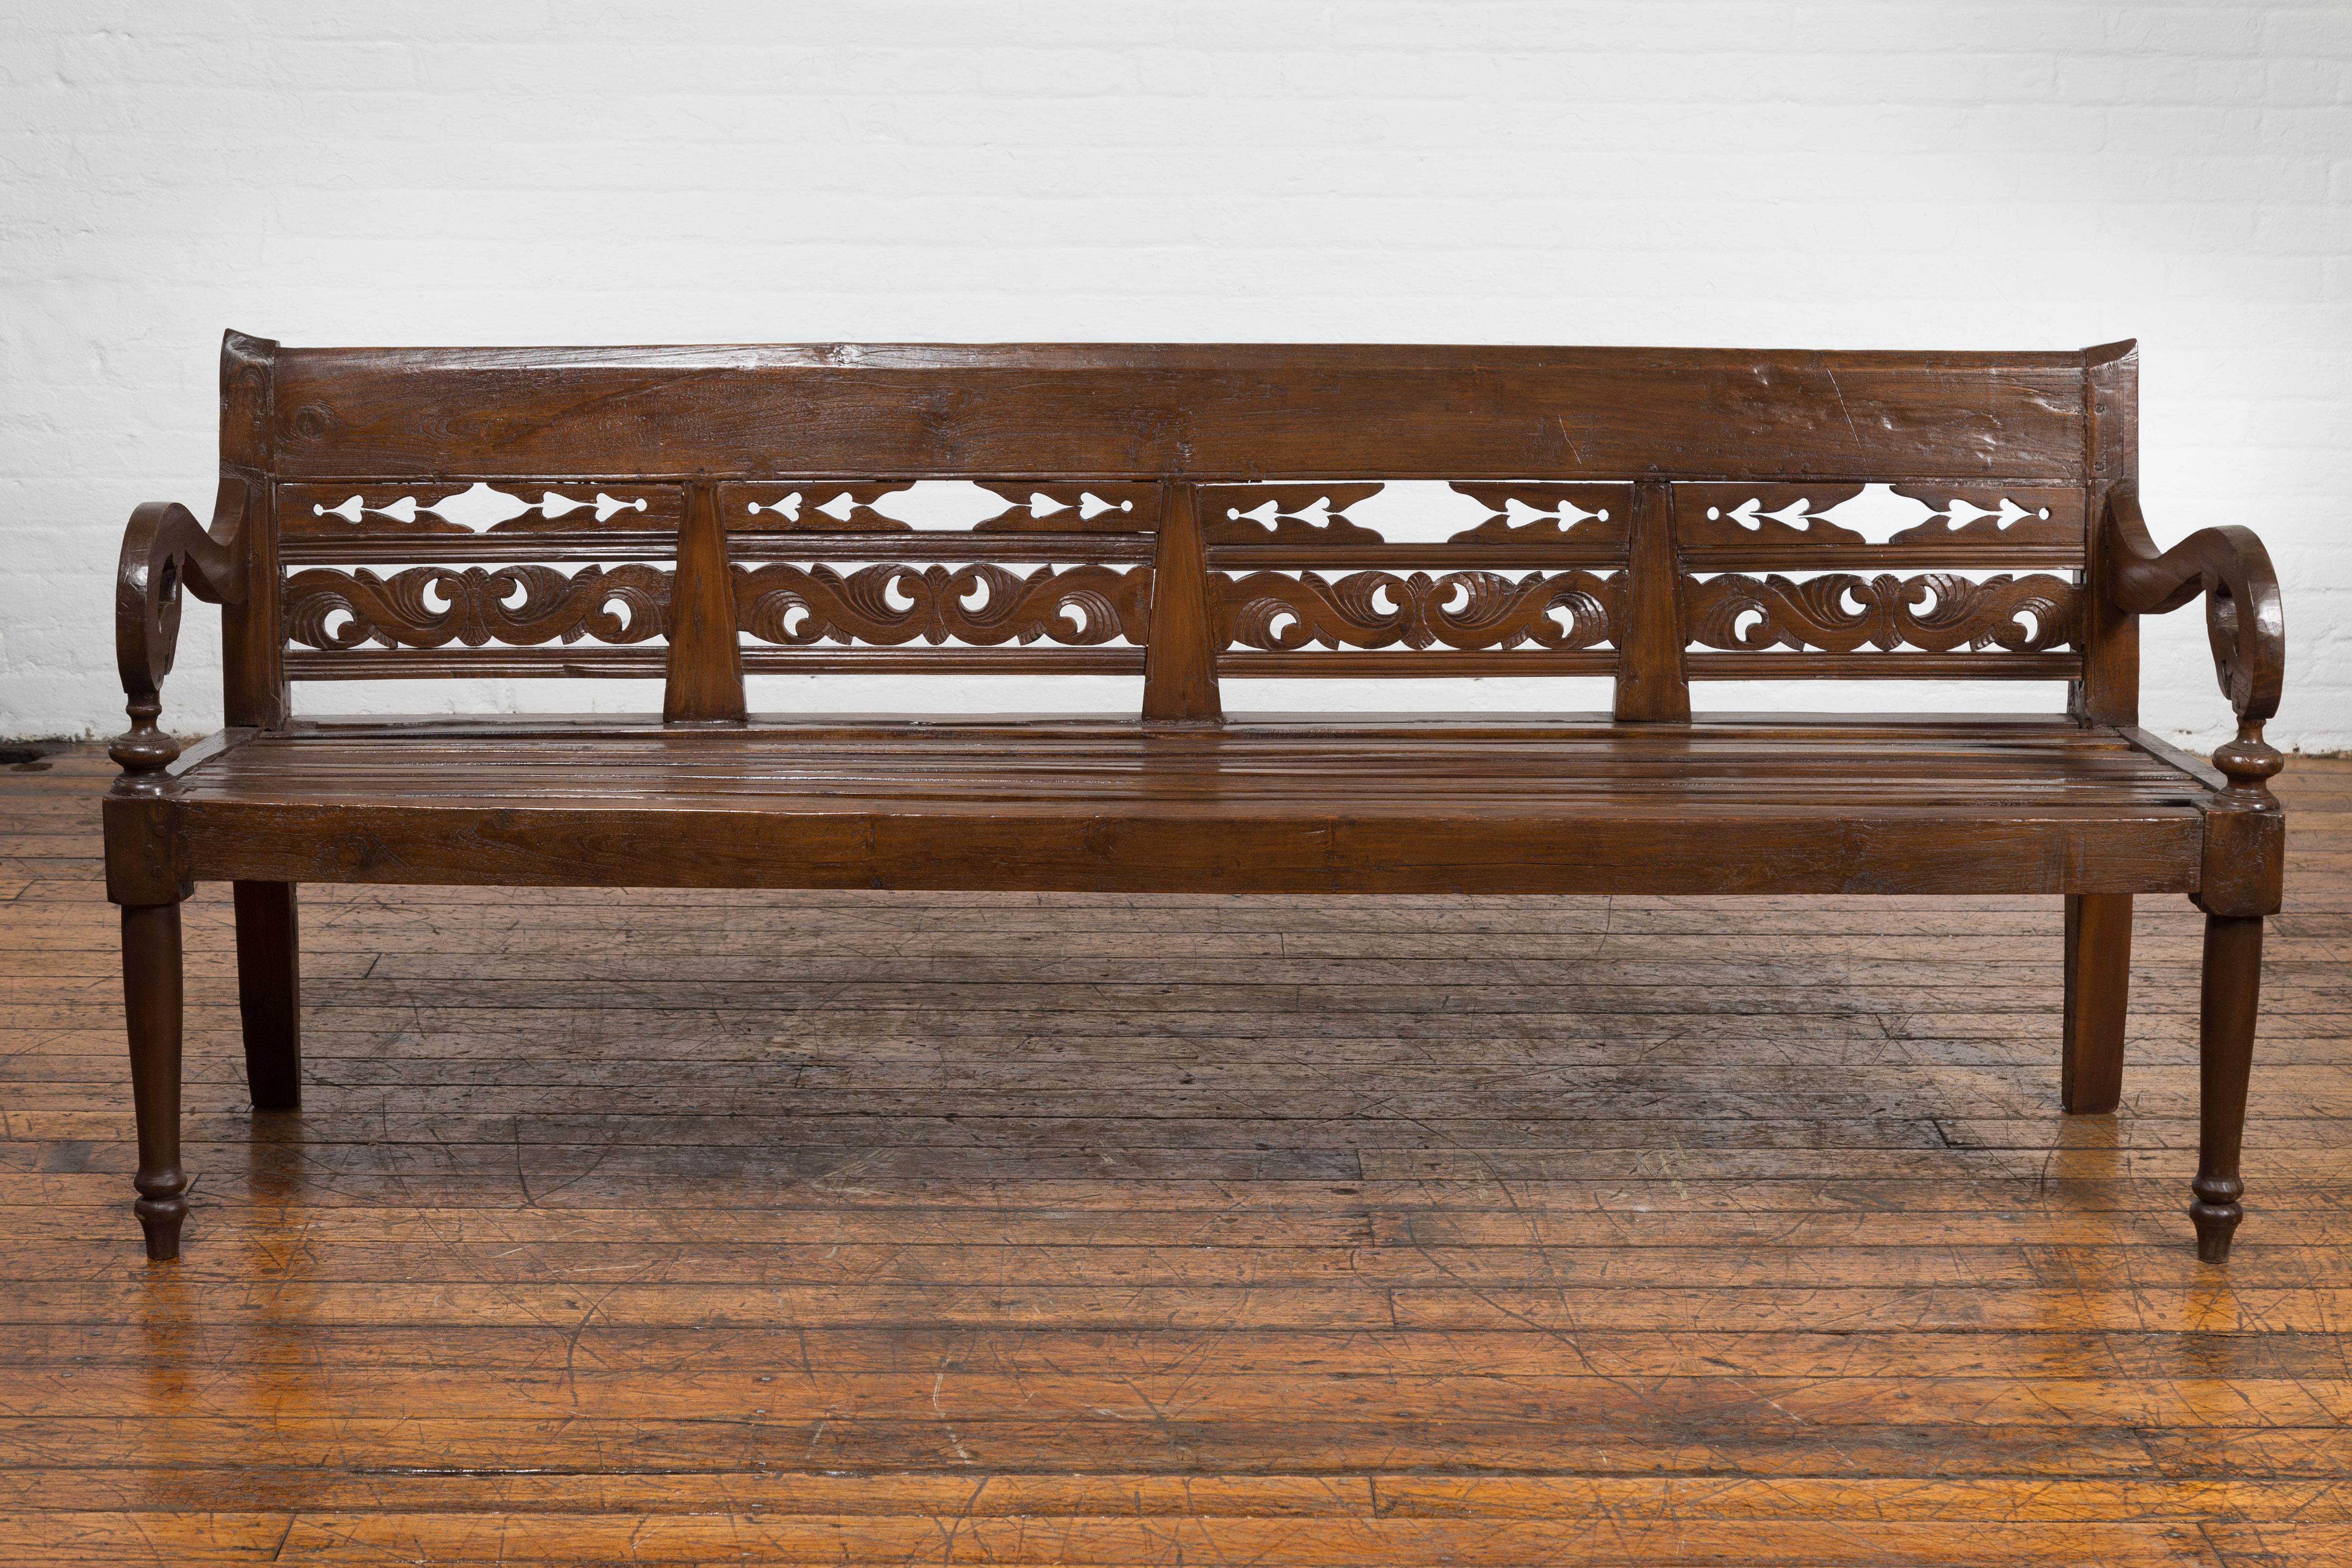 An antique teak wood settee from circa 1900 with hand-carved back, scrolling arms and turned legs. This Turn of the Century teak wood settee, dating back to circa 1900, is an exquisite blend of form and function. The backrest stands as a testament